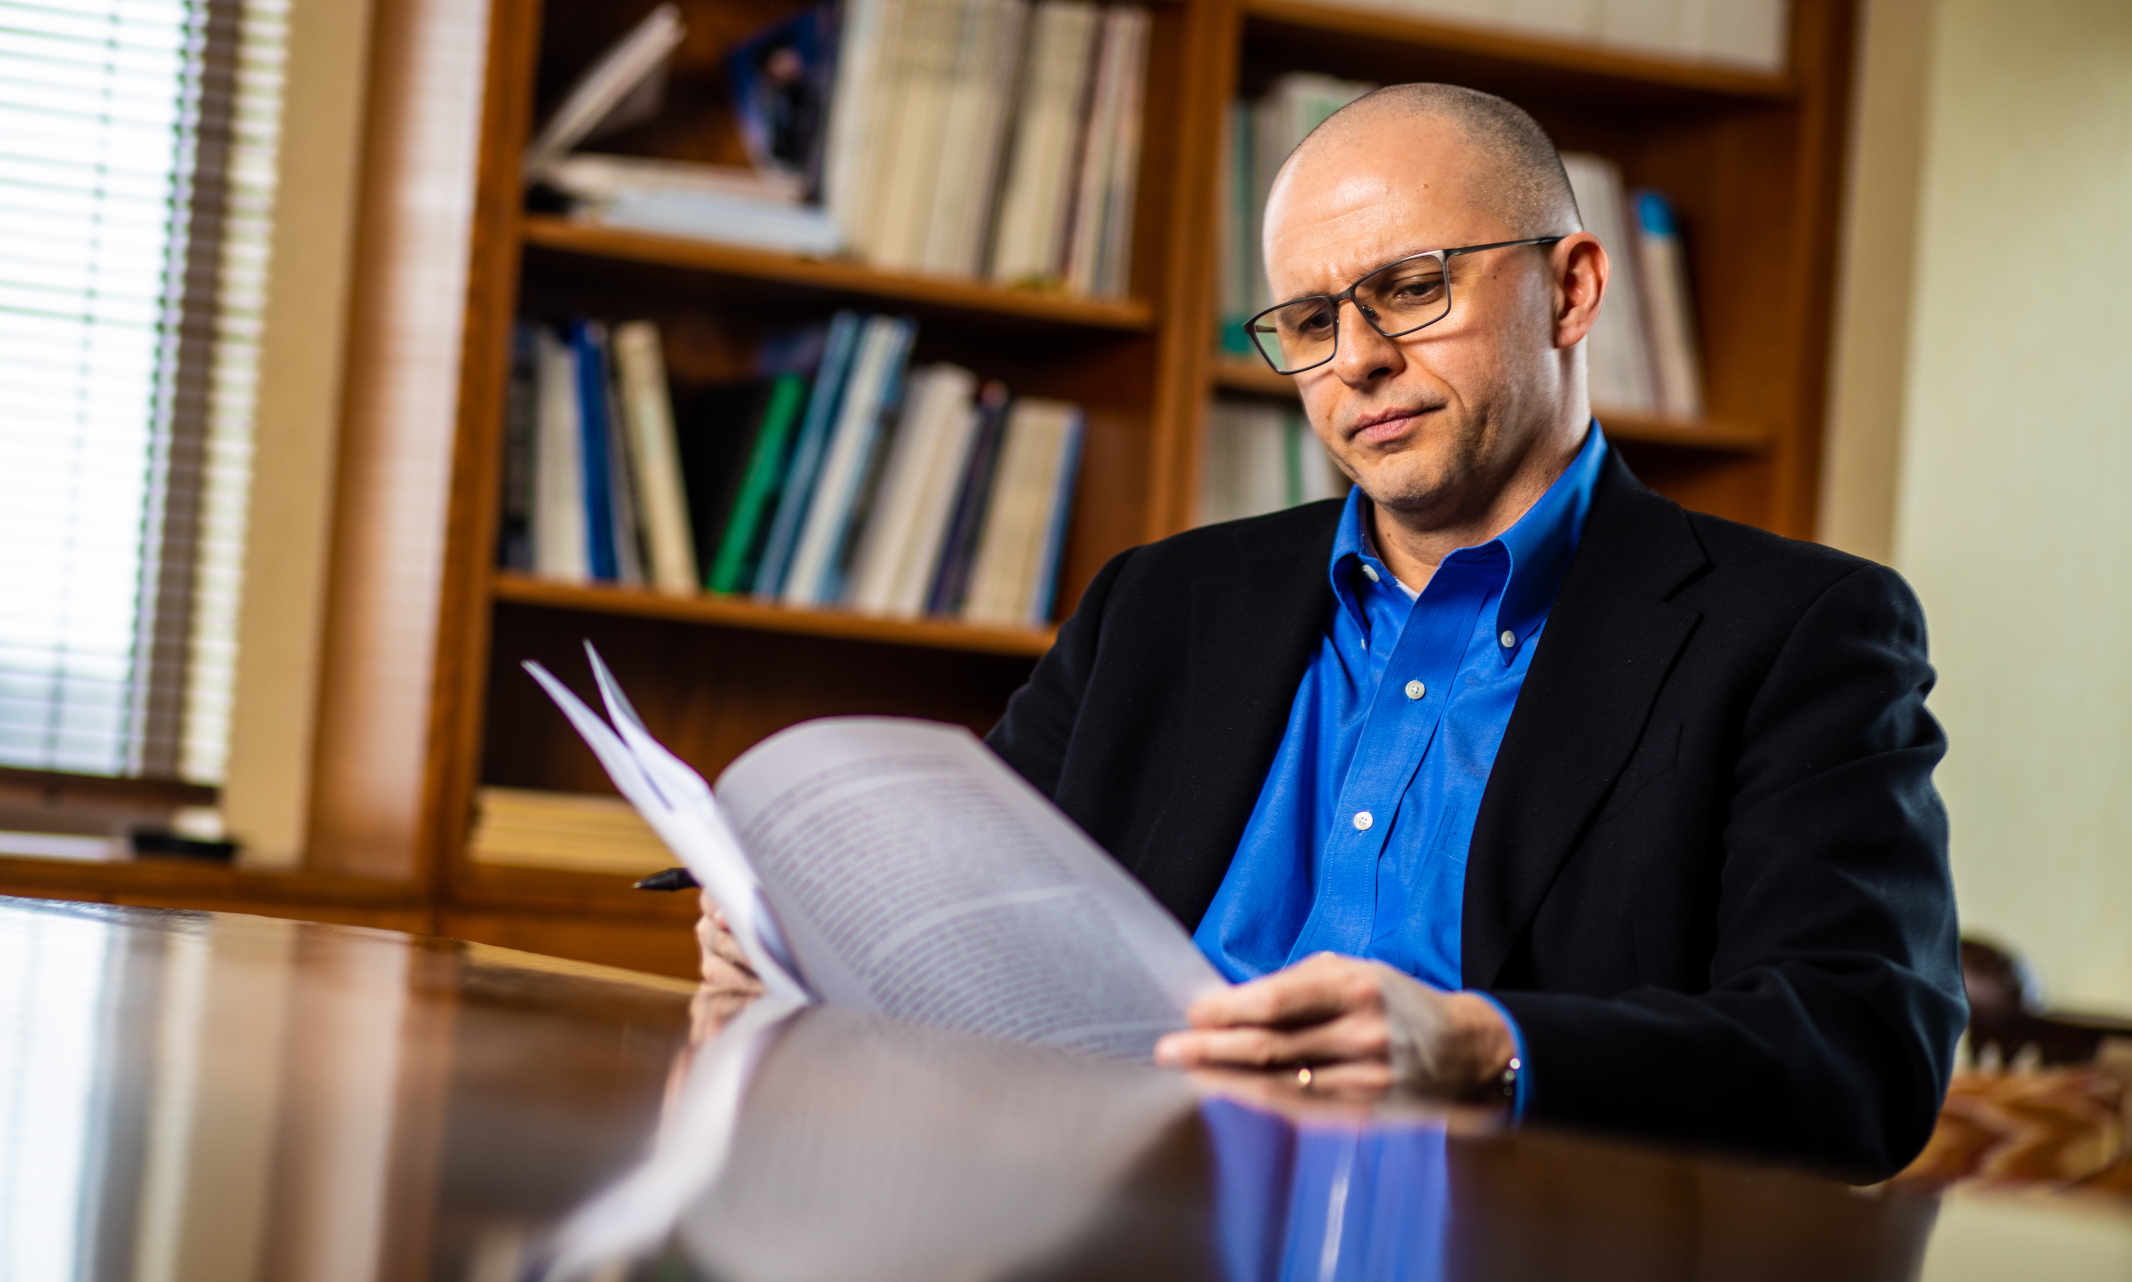 Professor Christopher Garmon perusing research paper in his office